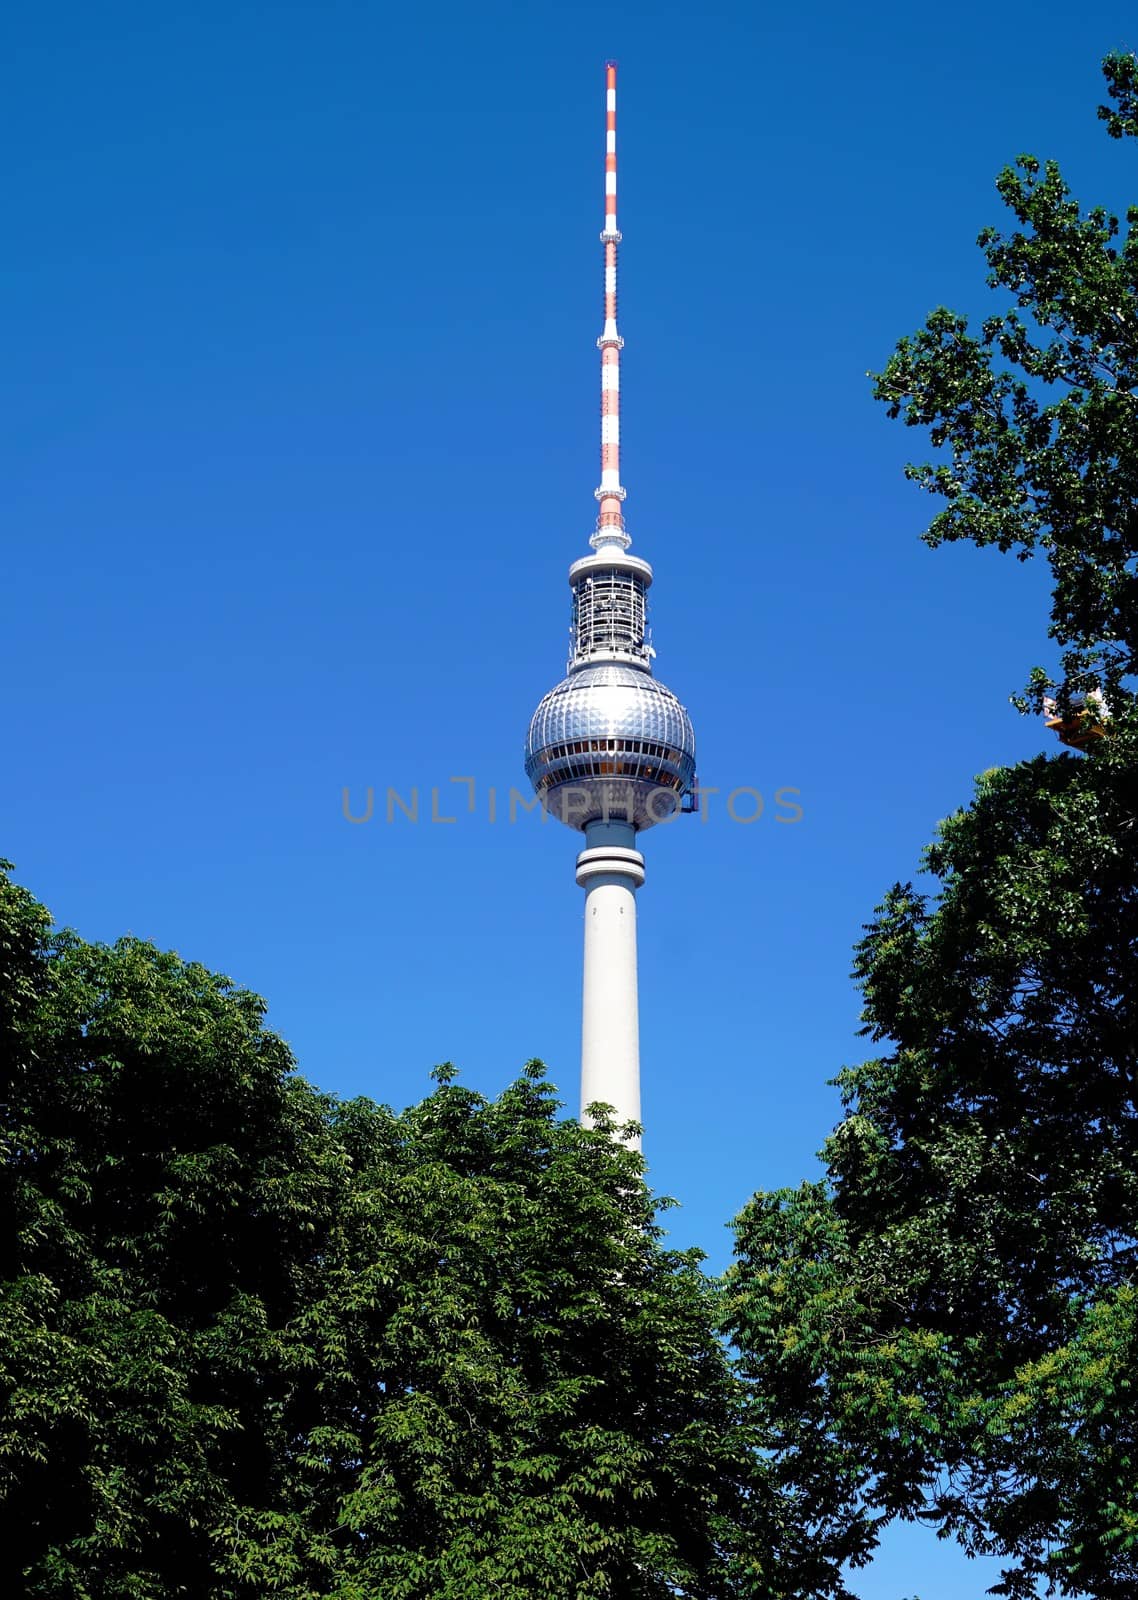 Berlin Fernsehturm in front of blue sky behind trees by pisces2386